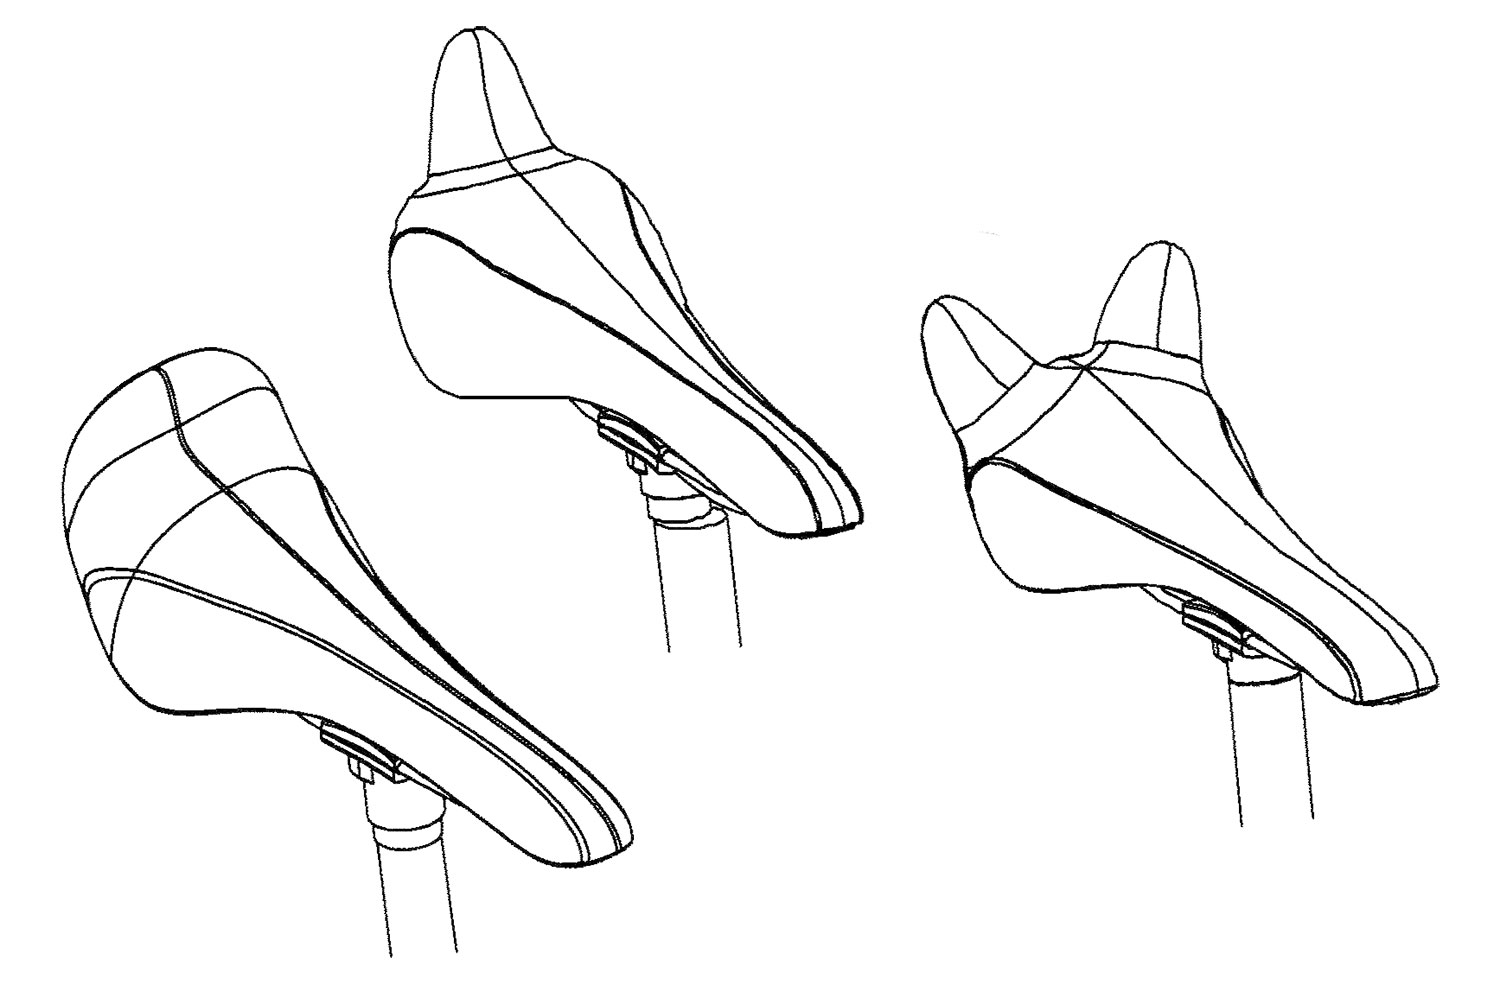 SaddleSpur unique ergonomic cycling saddle design with rear coccyx support, patent alternatives drawing